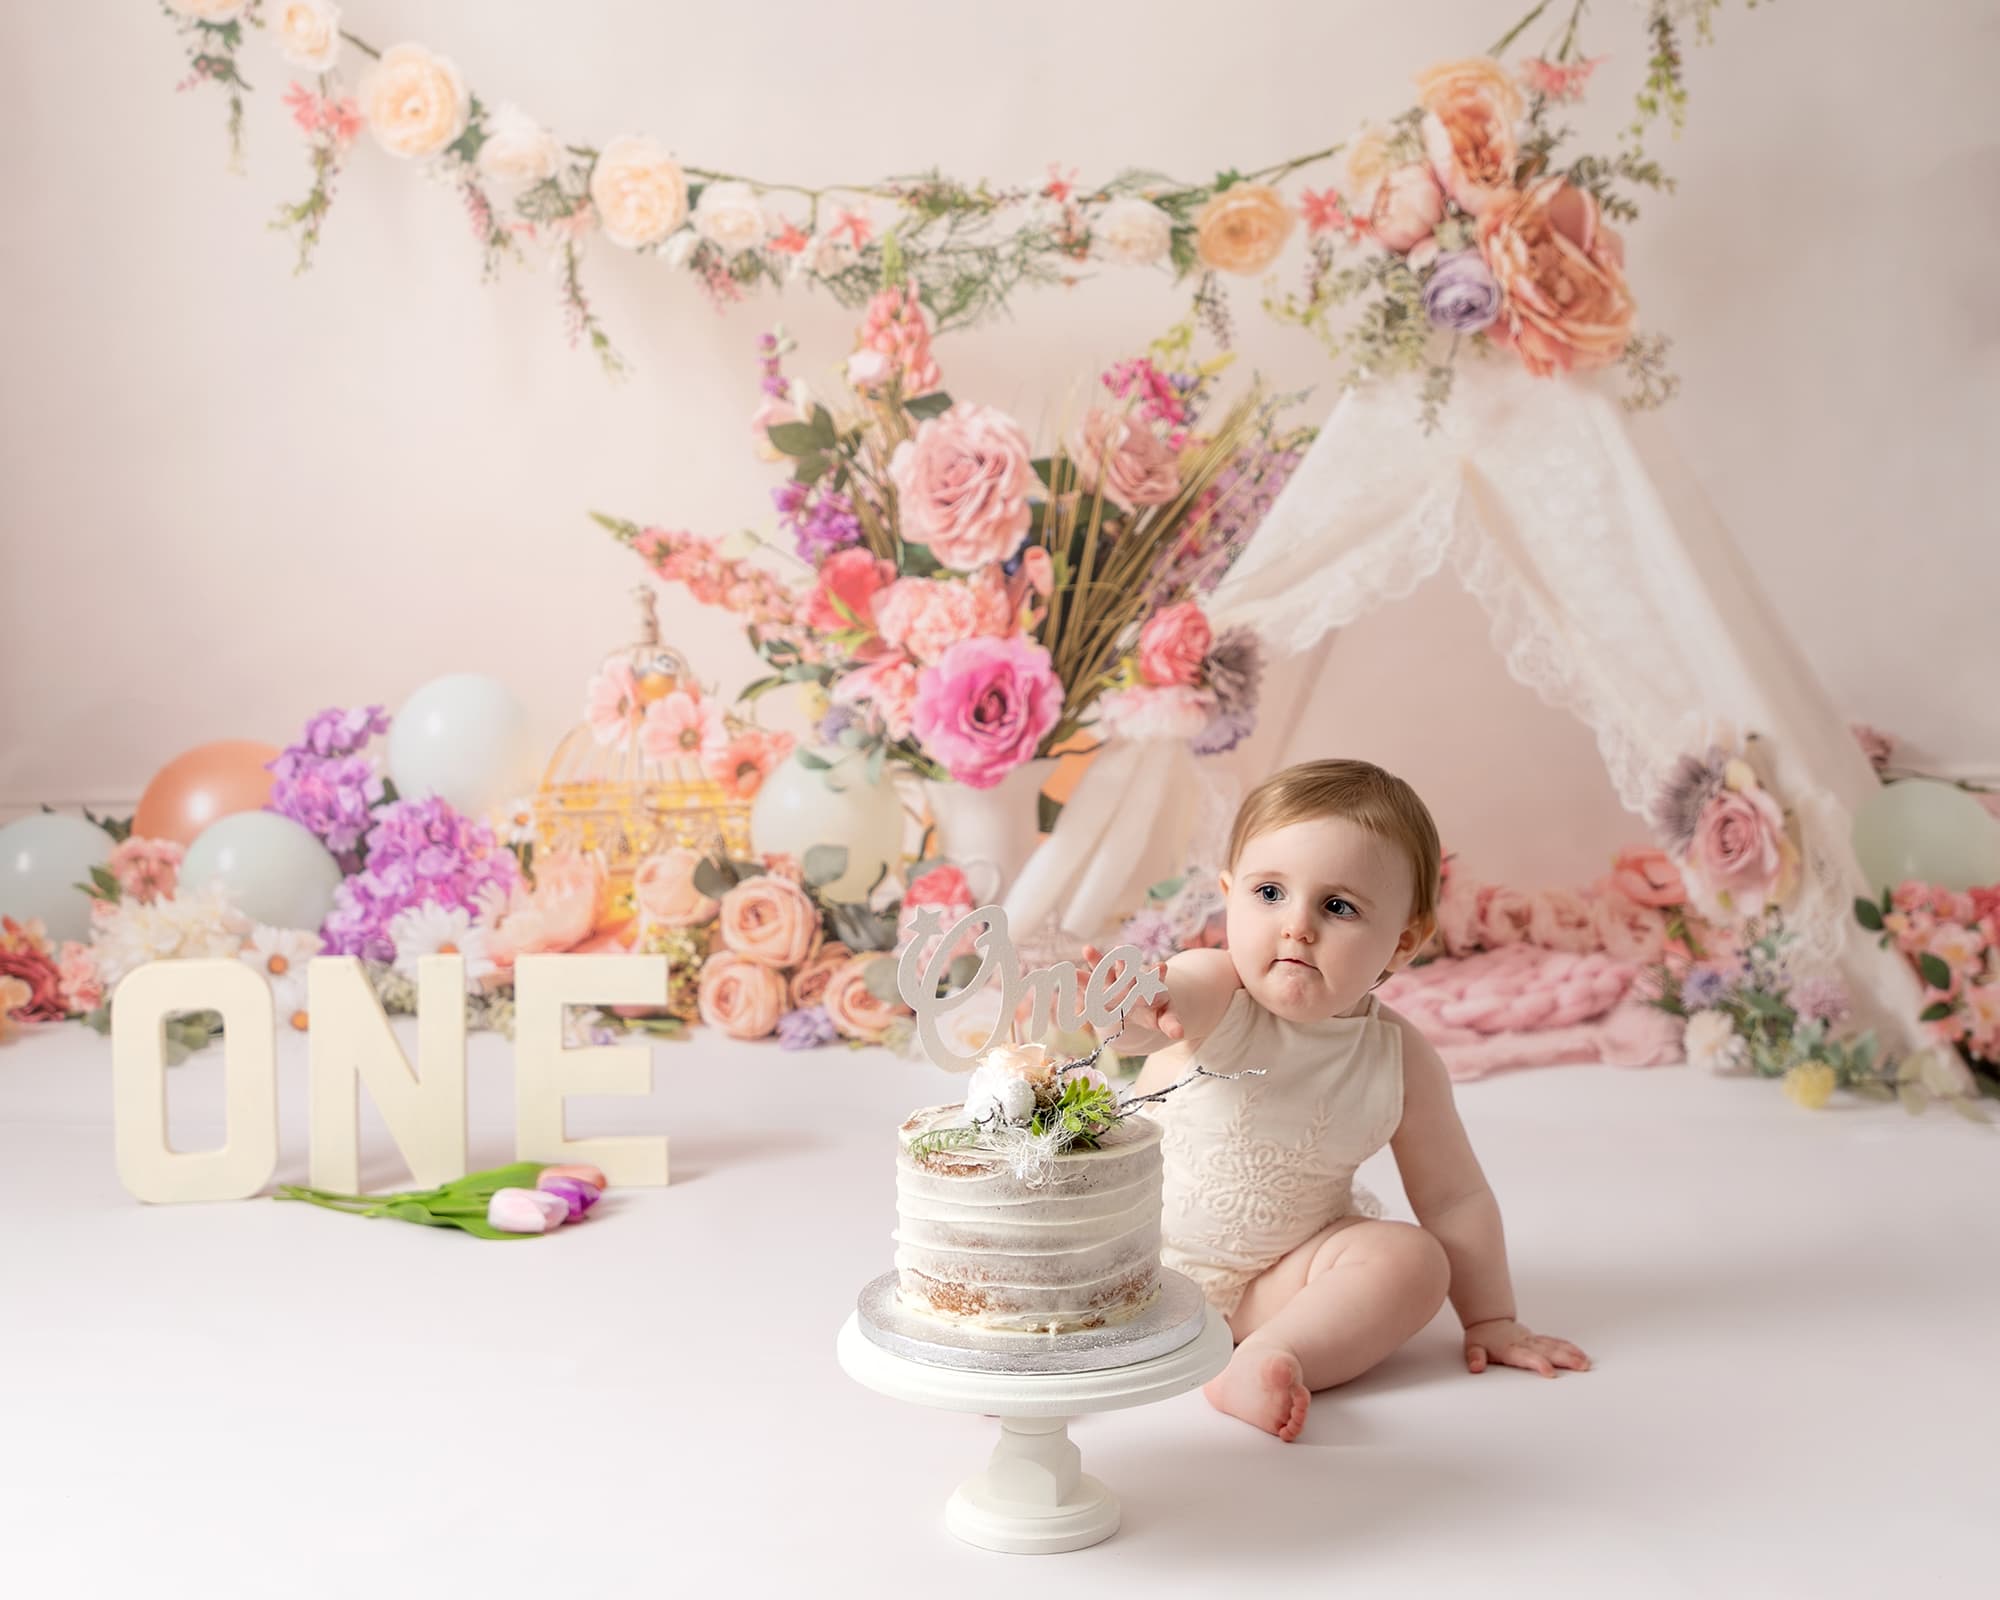 Baby girl wearing a cream romper sat looking at her birthday cake. Baby is at her 1st birthday photoshoot in Glasgow. Backdrop of floral arrangement and a teepee